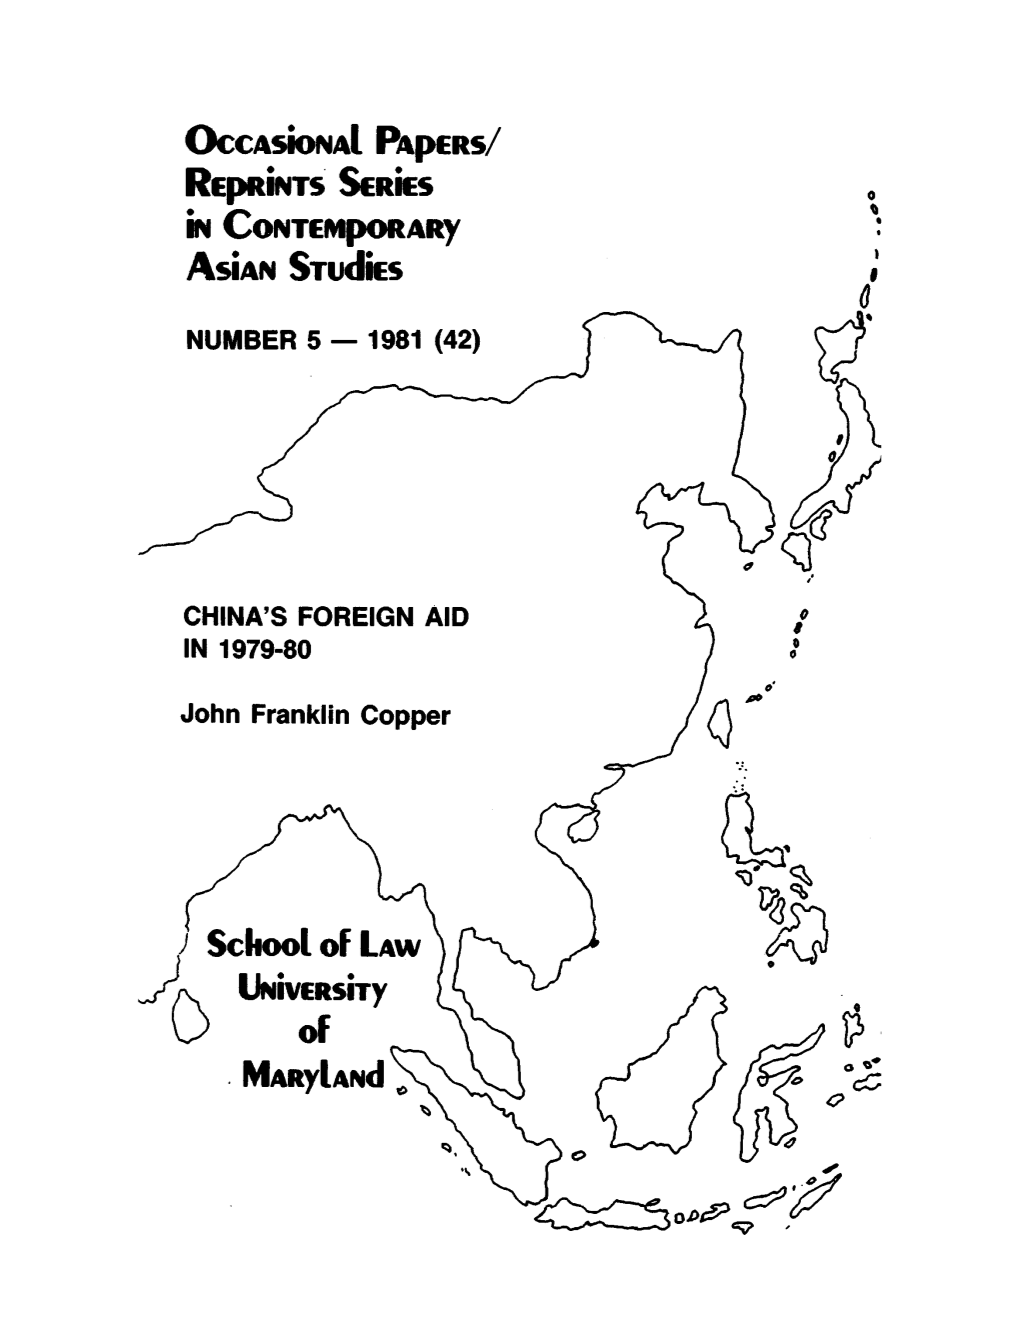 China's Foreign Aid in 1979-80